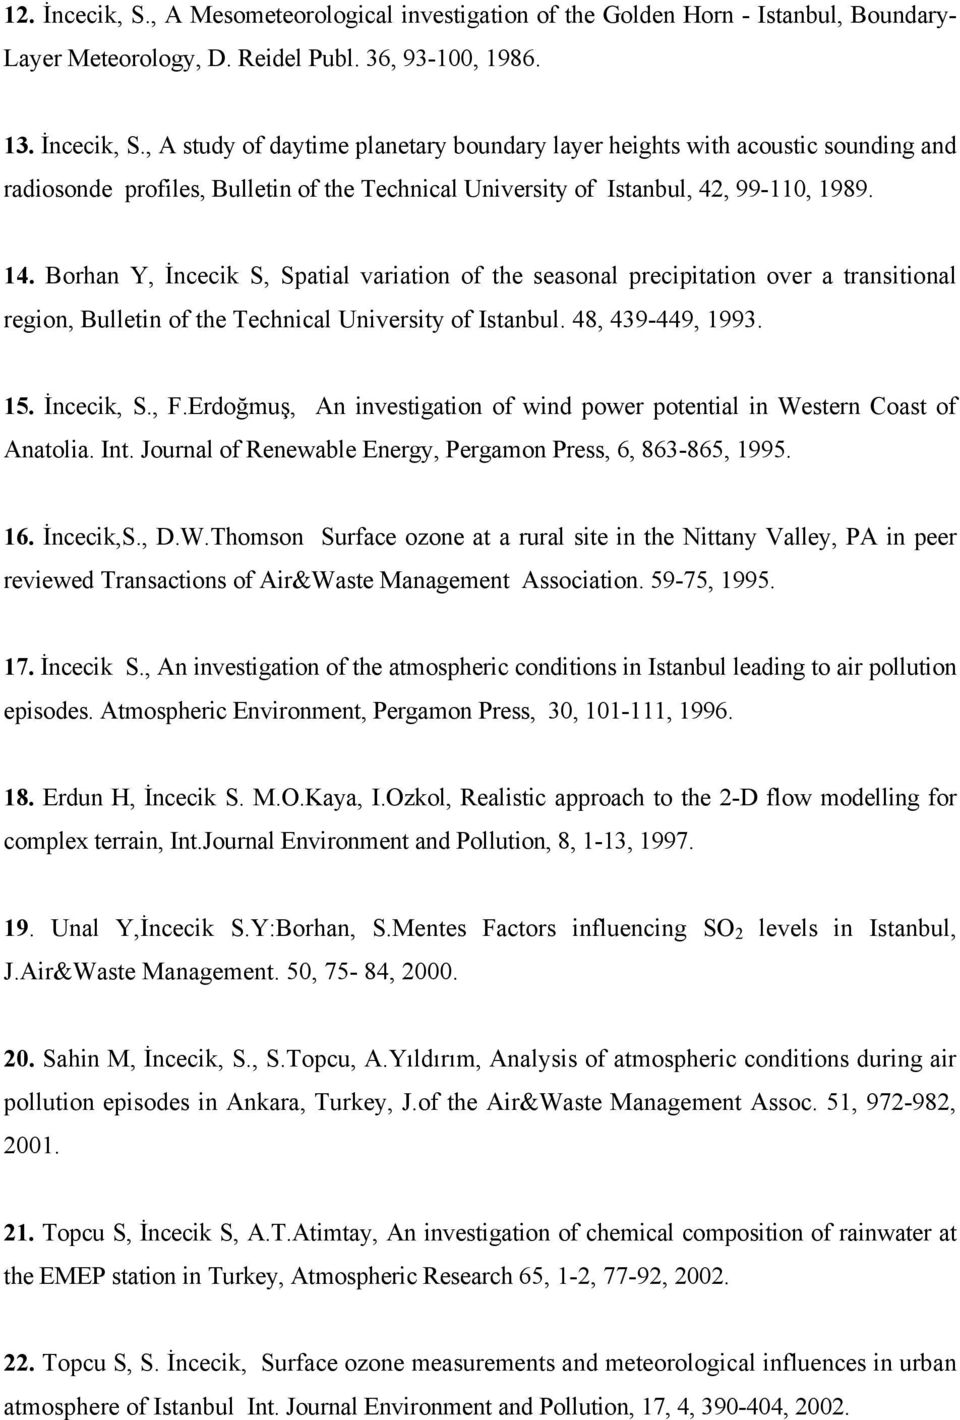 Erdoğmuş, An investigation of wind power potential in Western Coast of Anatolia. Int. Journal of Renewable Energy, Pergamon Press, 6, 863-865, 1995. 16. İncecik,S., D.W.Thomson Surface ozone at a rural site in the Nittany Valley, PA in peer reviewed Transactions of Air&Waste Management Association.